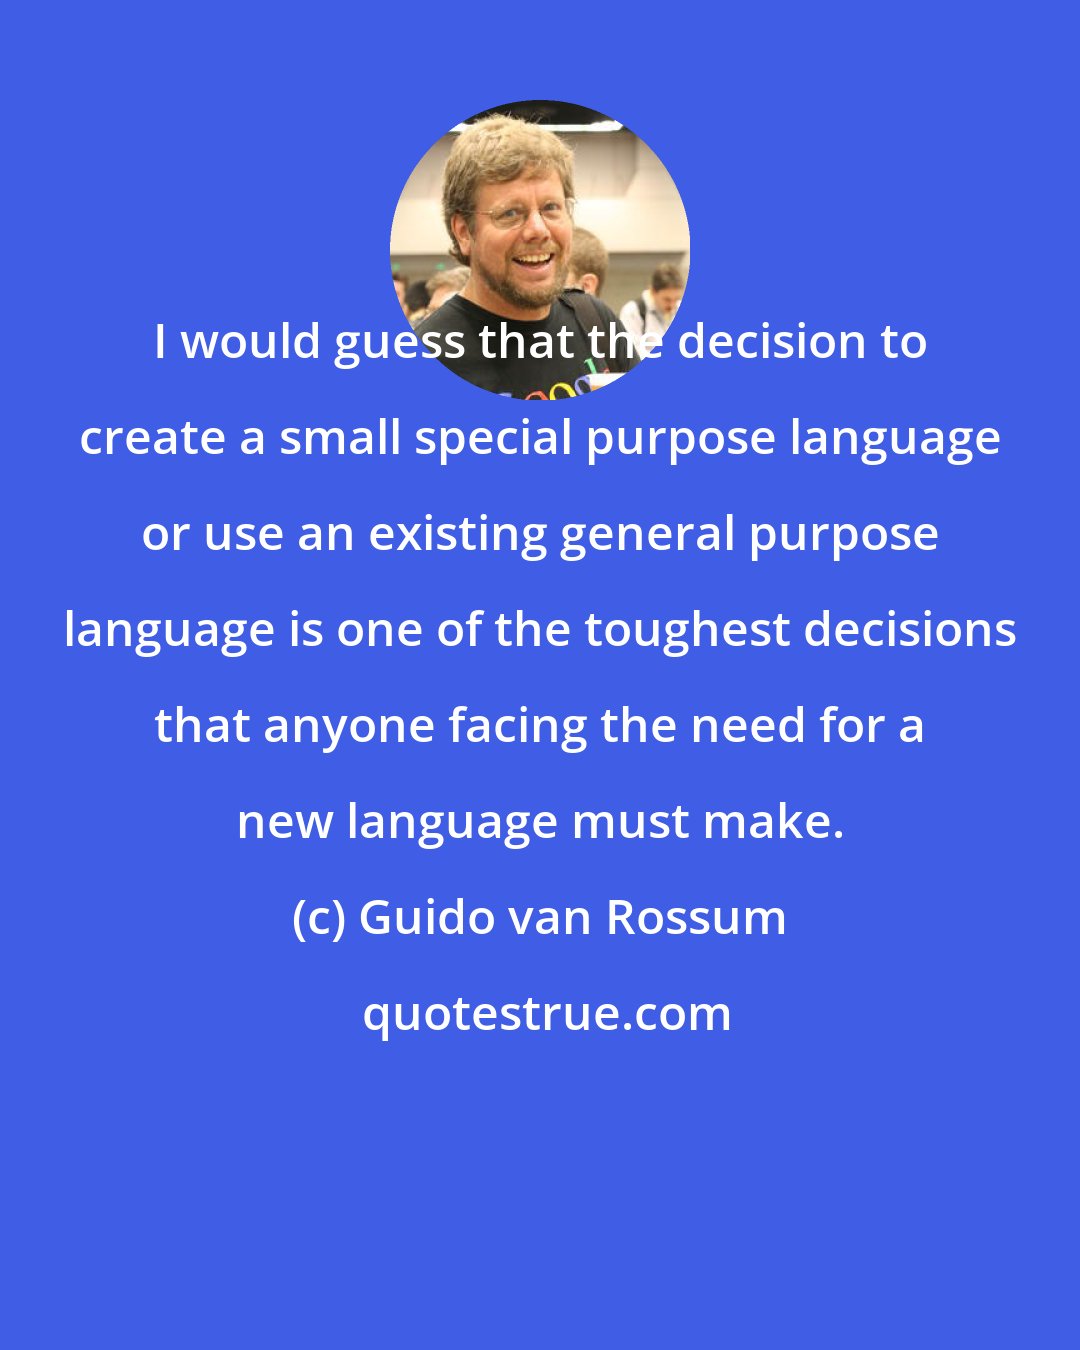 Guido van Rossum: I would guess that the decision to create a small special purpose language or use an existing general purpose language is one of the toughest decisions that anyone facing the need for a new language must make.